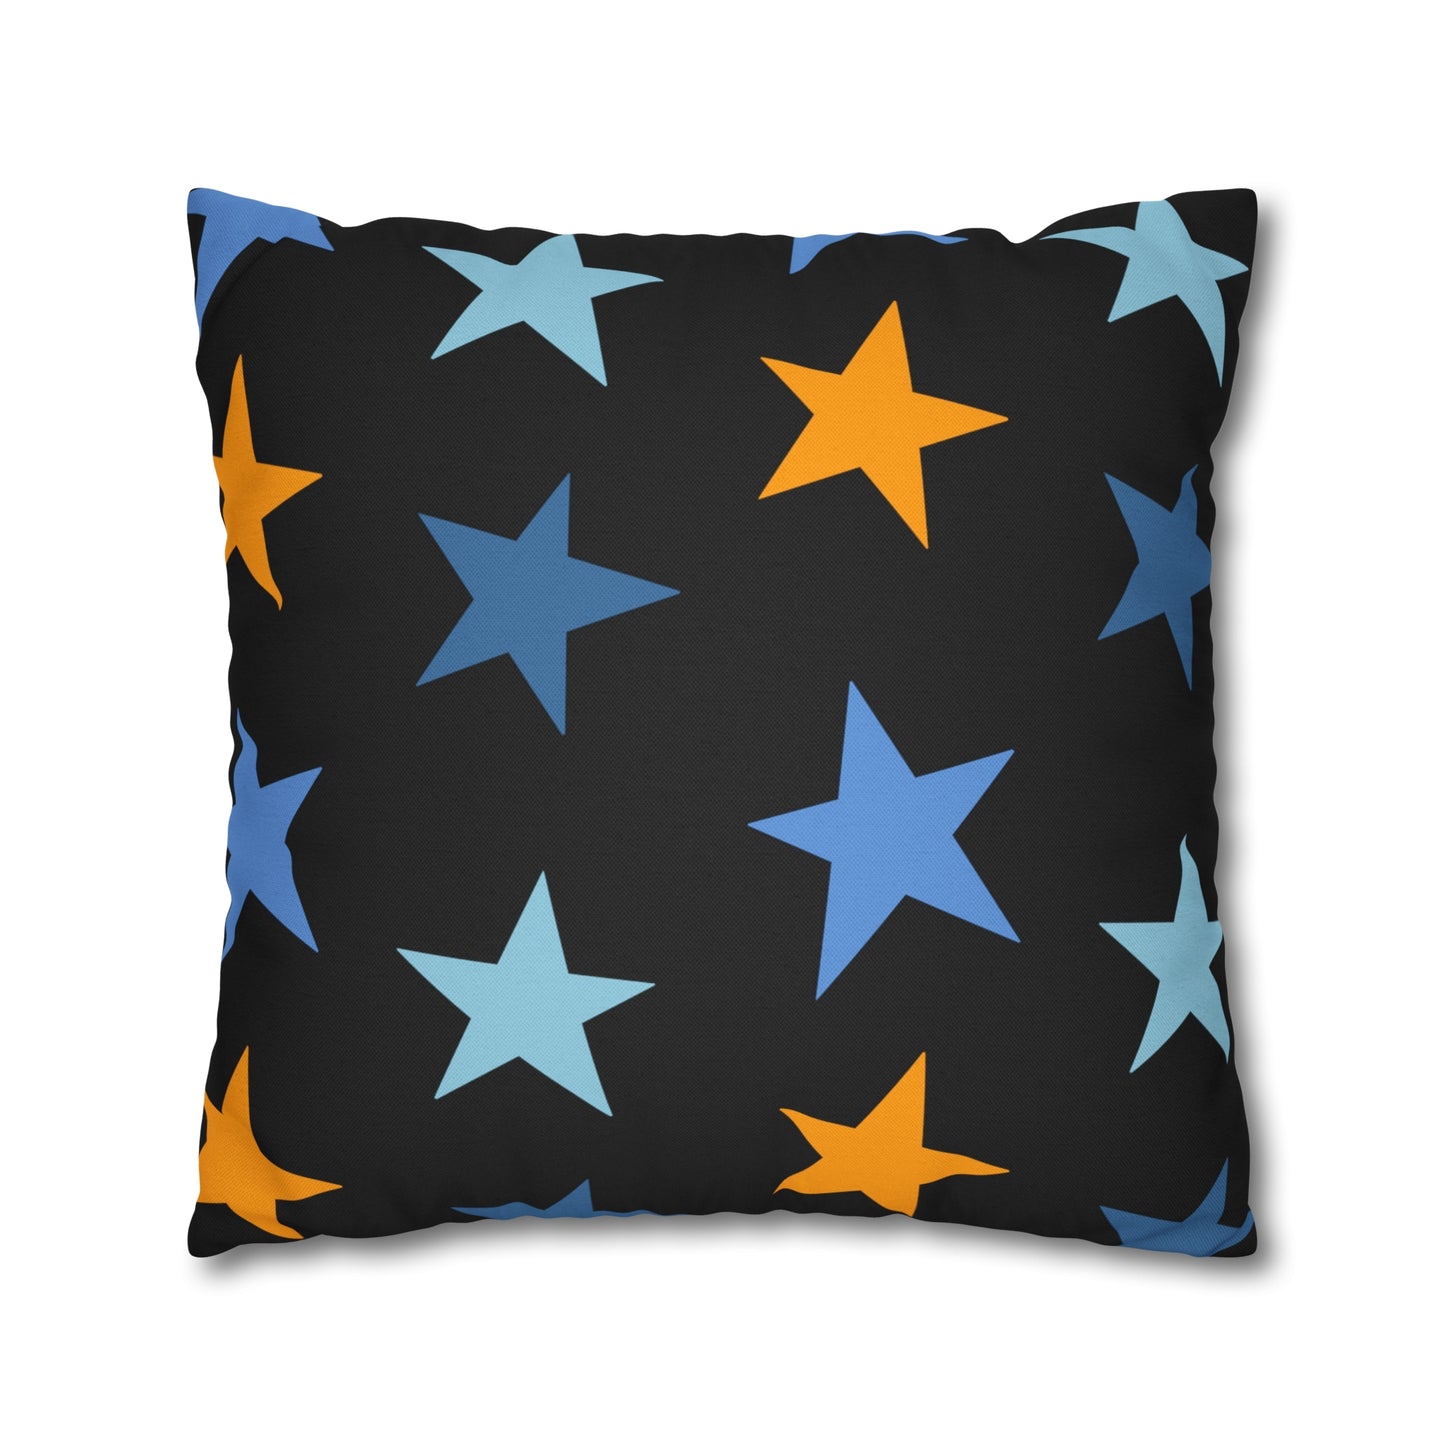 Solar System Spun Polyester Square Pillowcase, Sun and Planets Pillow, STEM Collection Throw Pillow